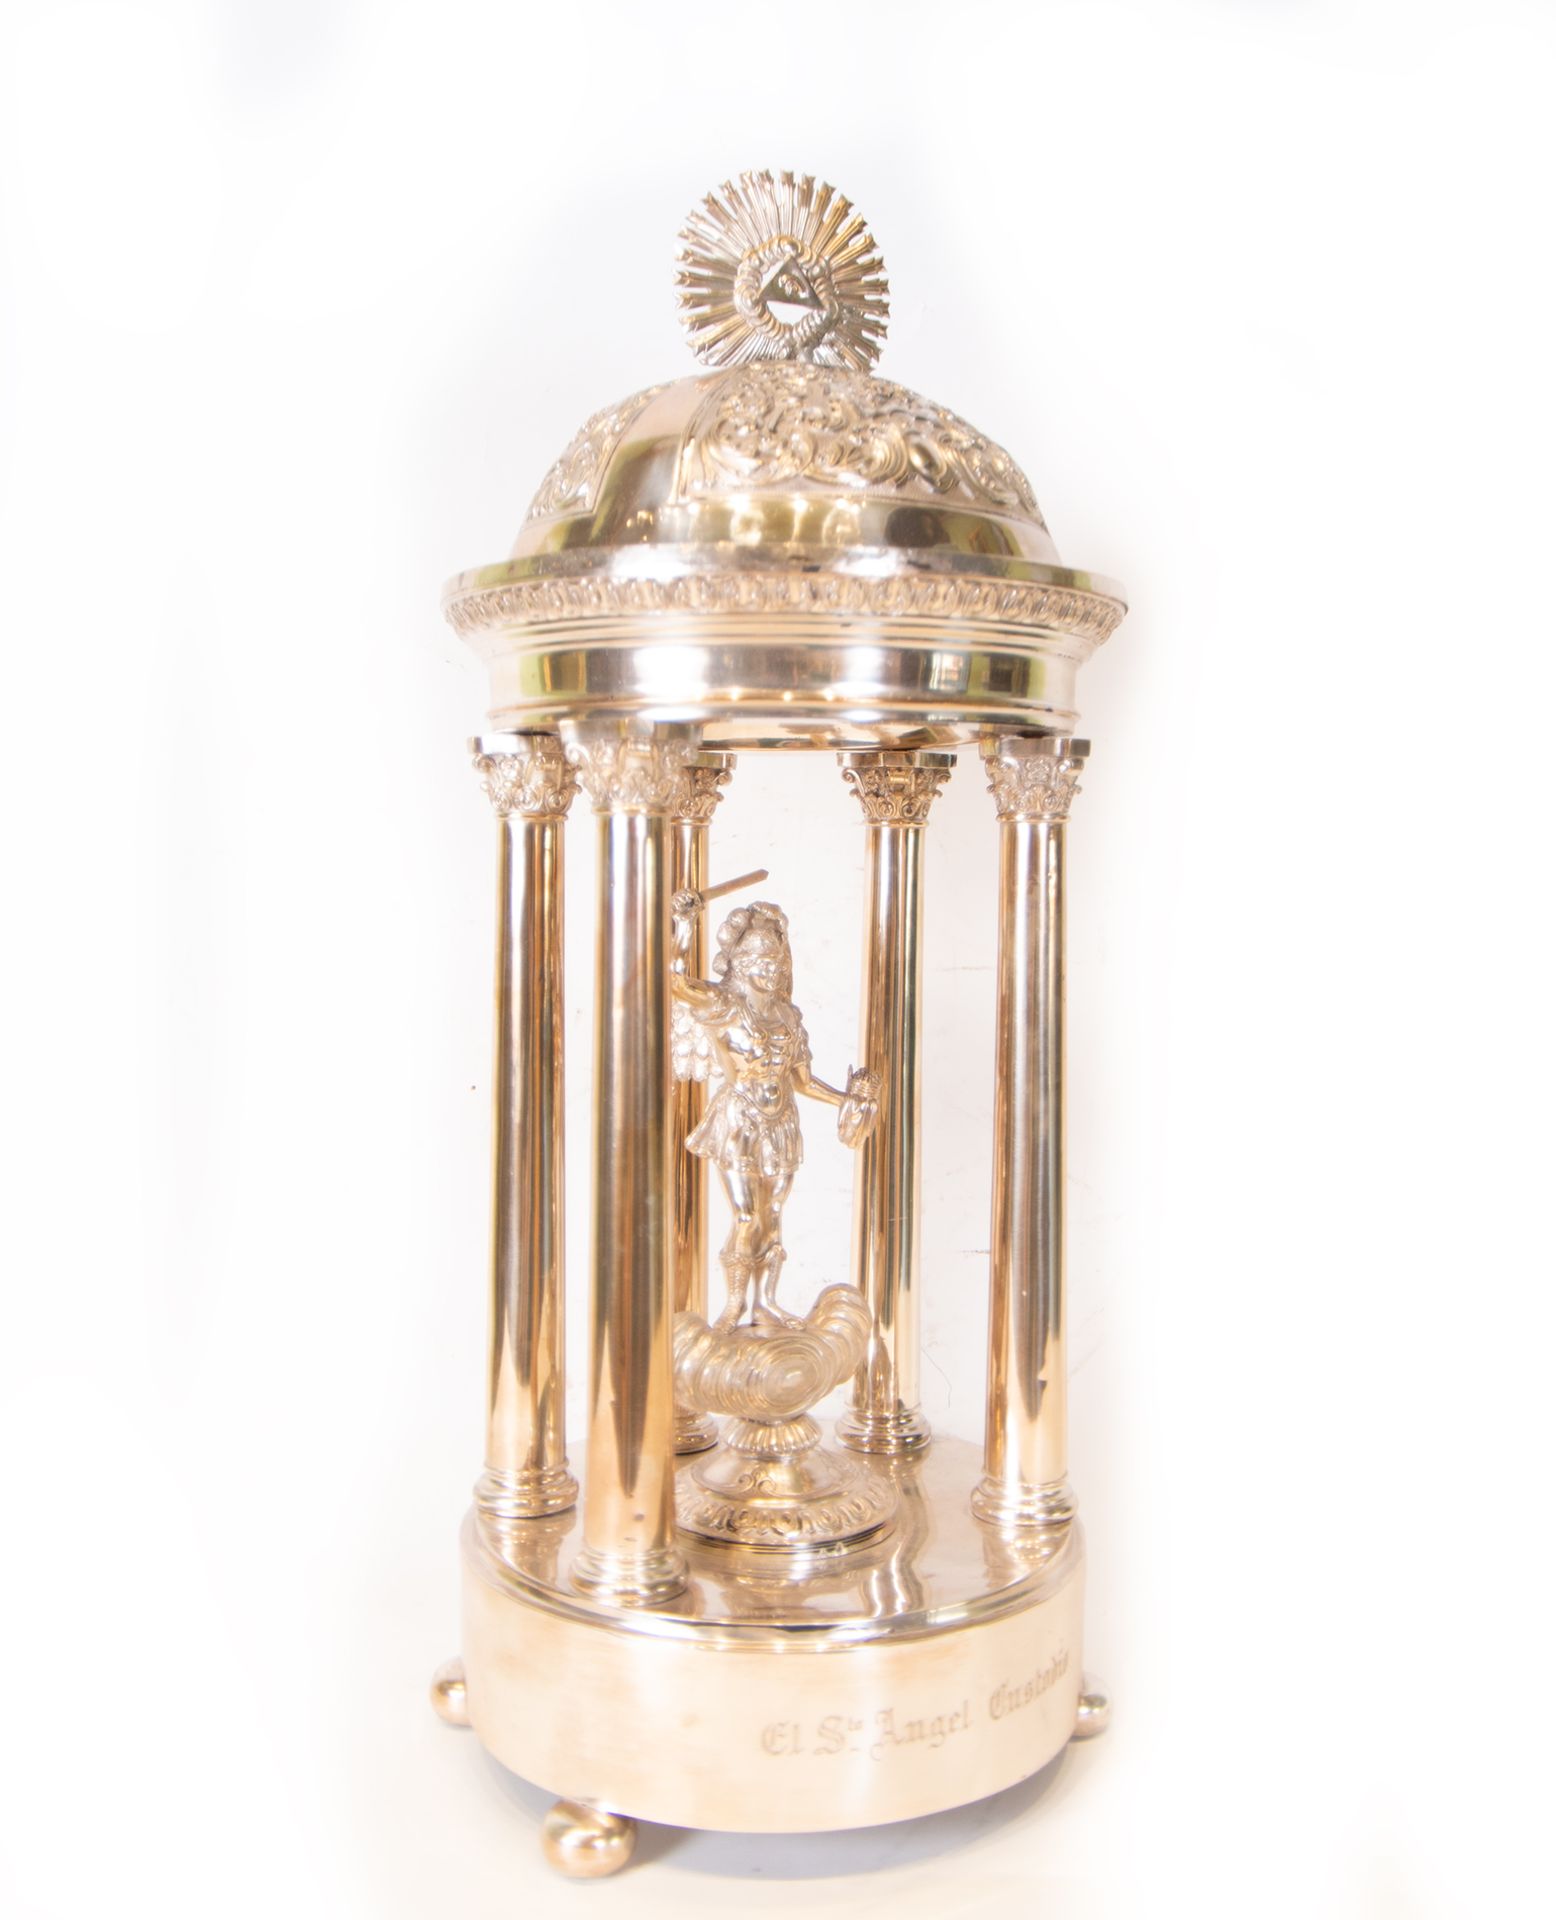 Large Templete-type Tabletop Monstrance in Sterling Silver with the figure of the Custodian Archange - Image 2 of 4